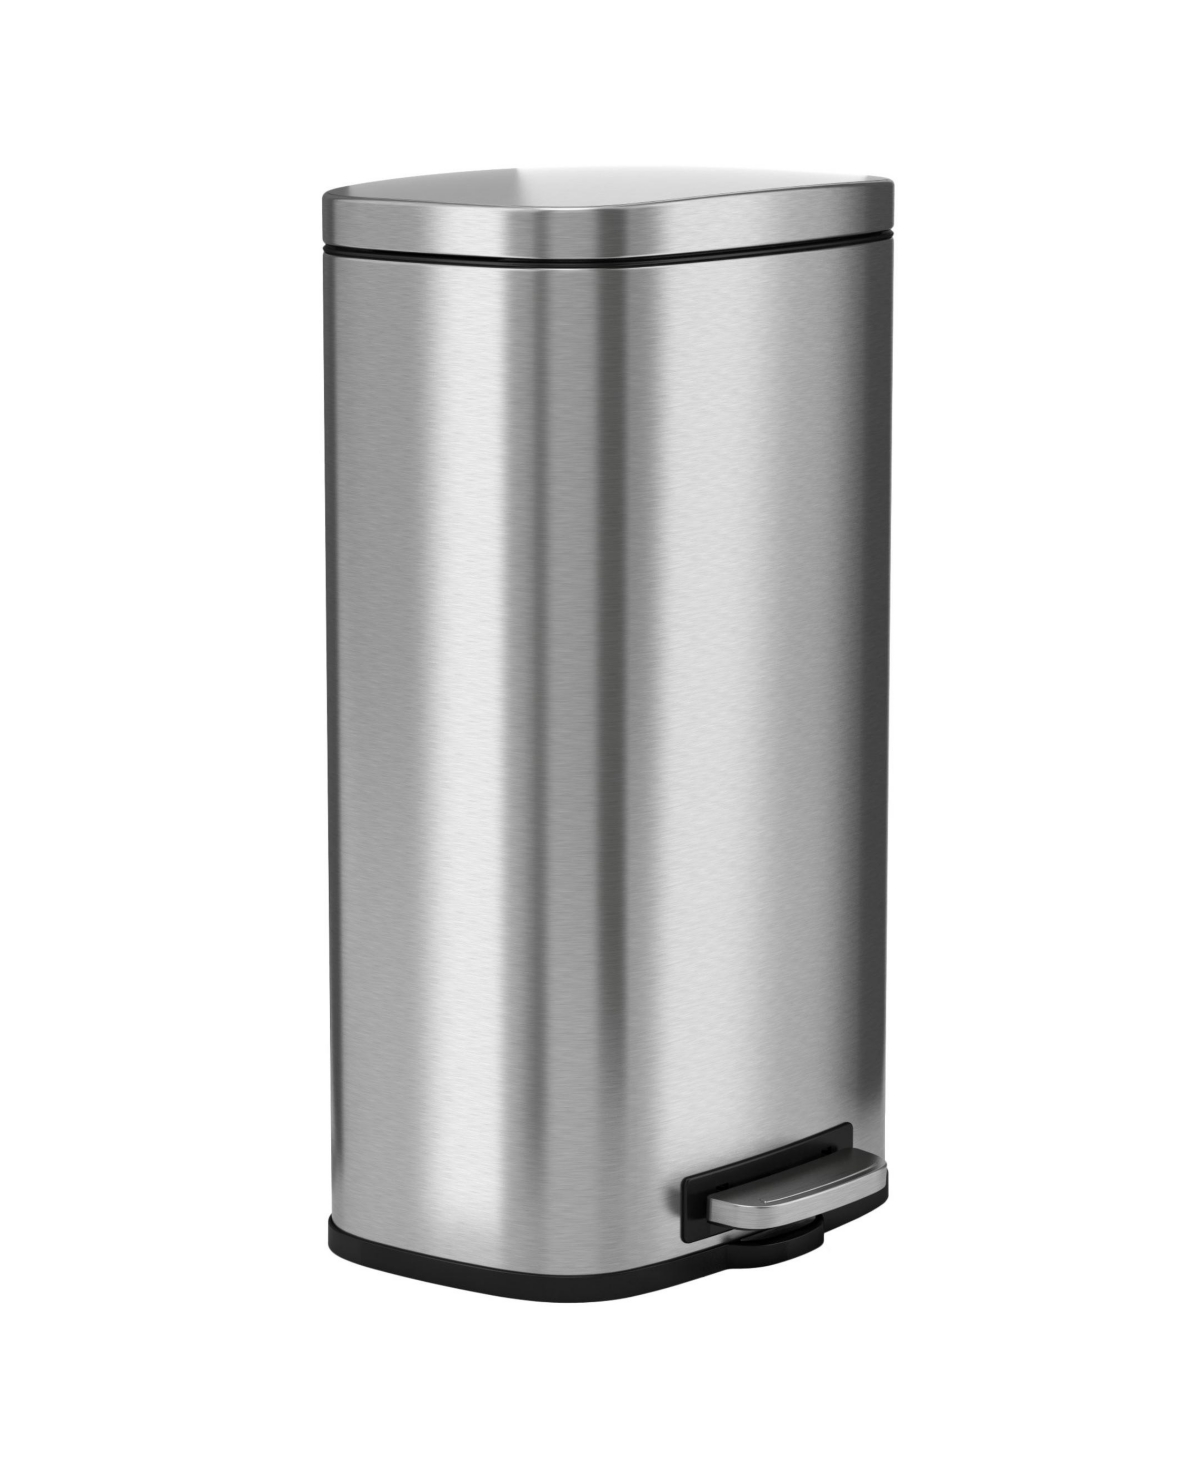 30 L / 8 Gal Premium Stainless Steel Step Trash Can - Silver